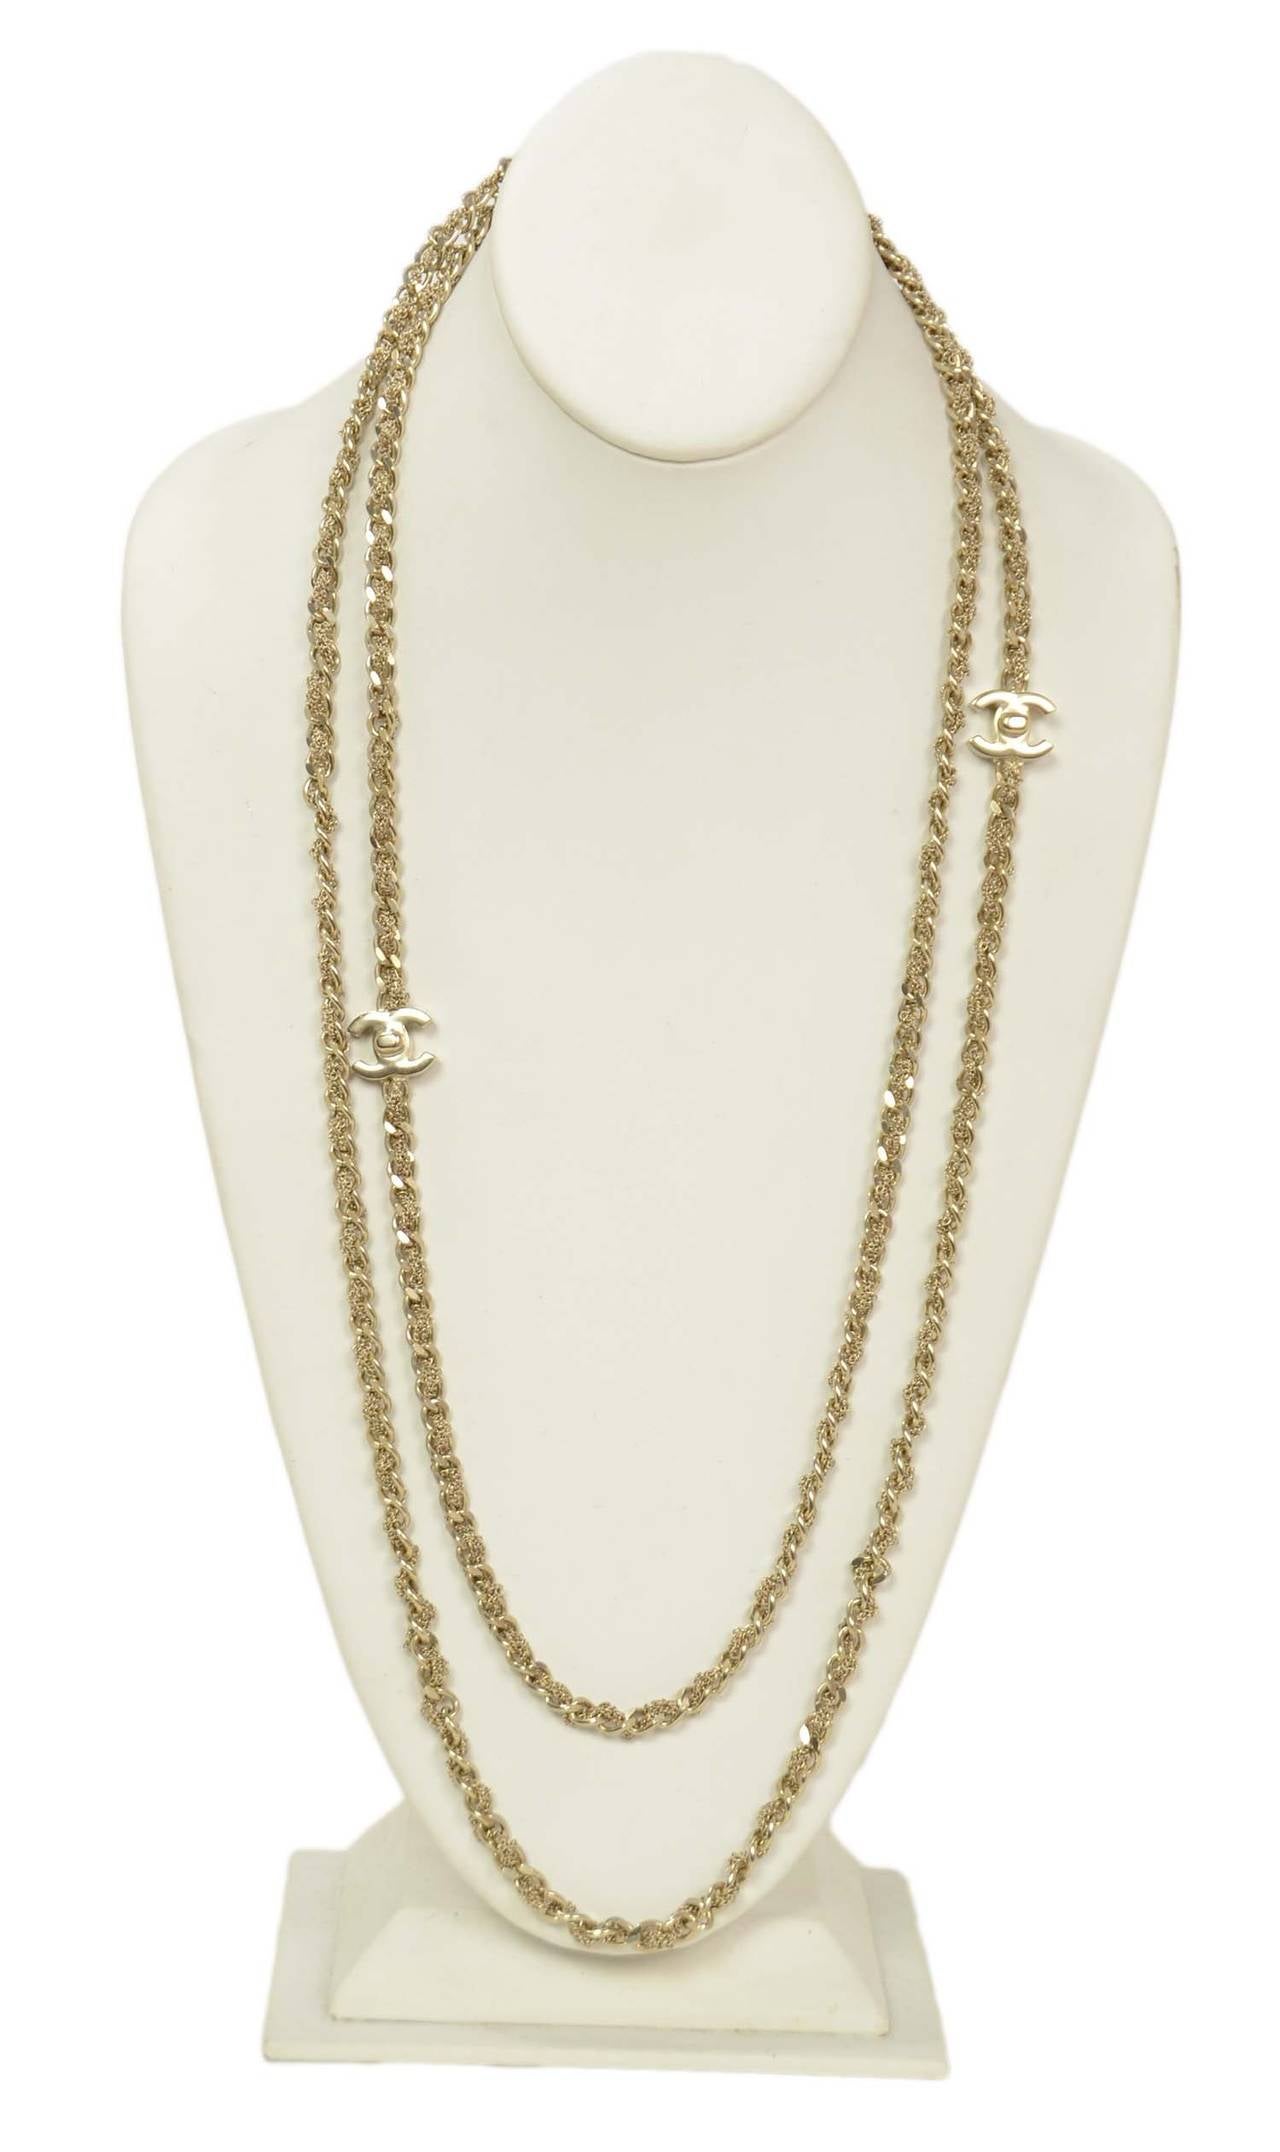 Chanel Braided Timeless Chains Necklace with CCs

can be worn long or doubled
Made in: Italy
Year of Production: 2012
Color: Light gold
Materials: Brushed metal
Hardware: Brushed light gold
Stamps: CHANEL B12 CC P MADE IN ITALY
Includes: